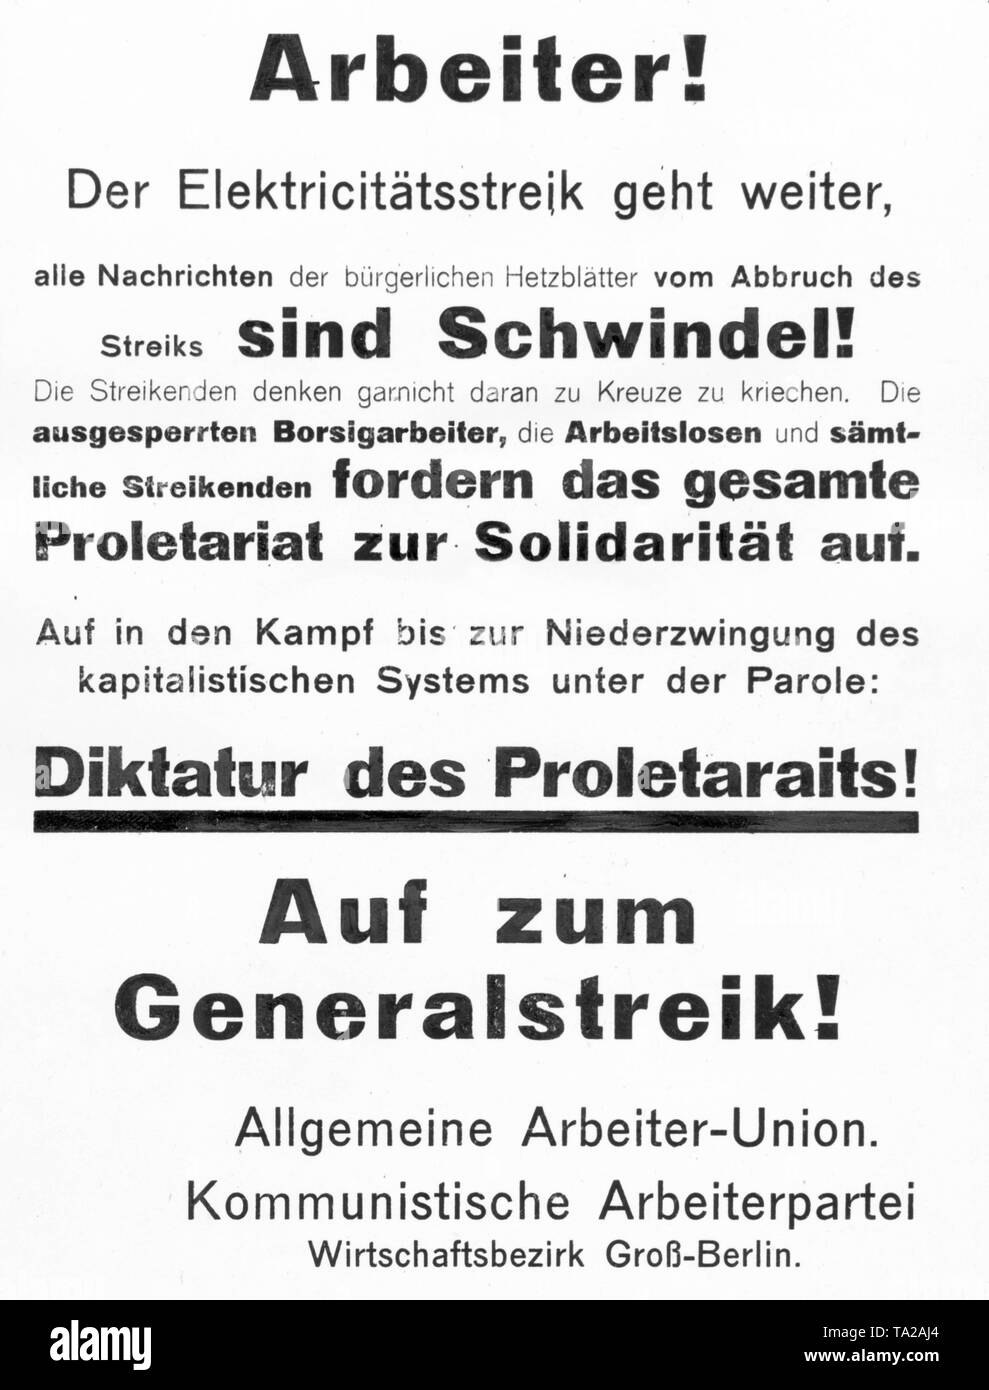 In a poster, the Communist Workers Party and the Allgemeine Arbeiter-Union (General Workers Union) call for the continuation of the electricity strike and warn against a call off of the general strike. Stock Photo